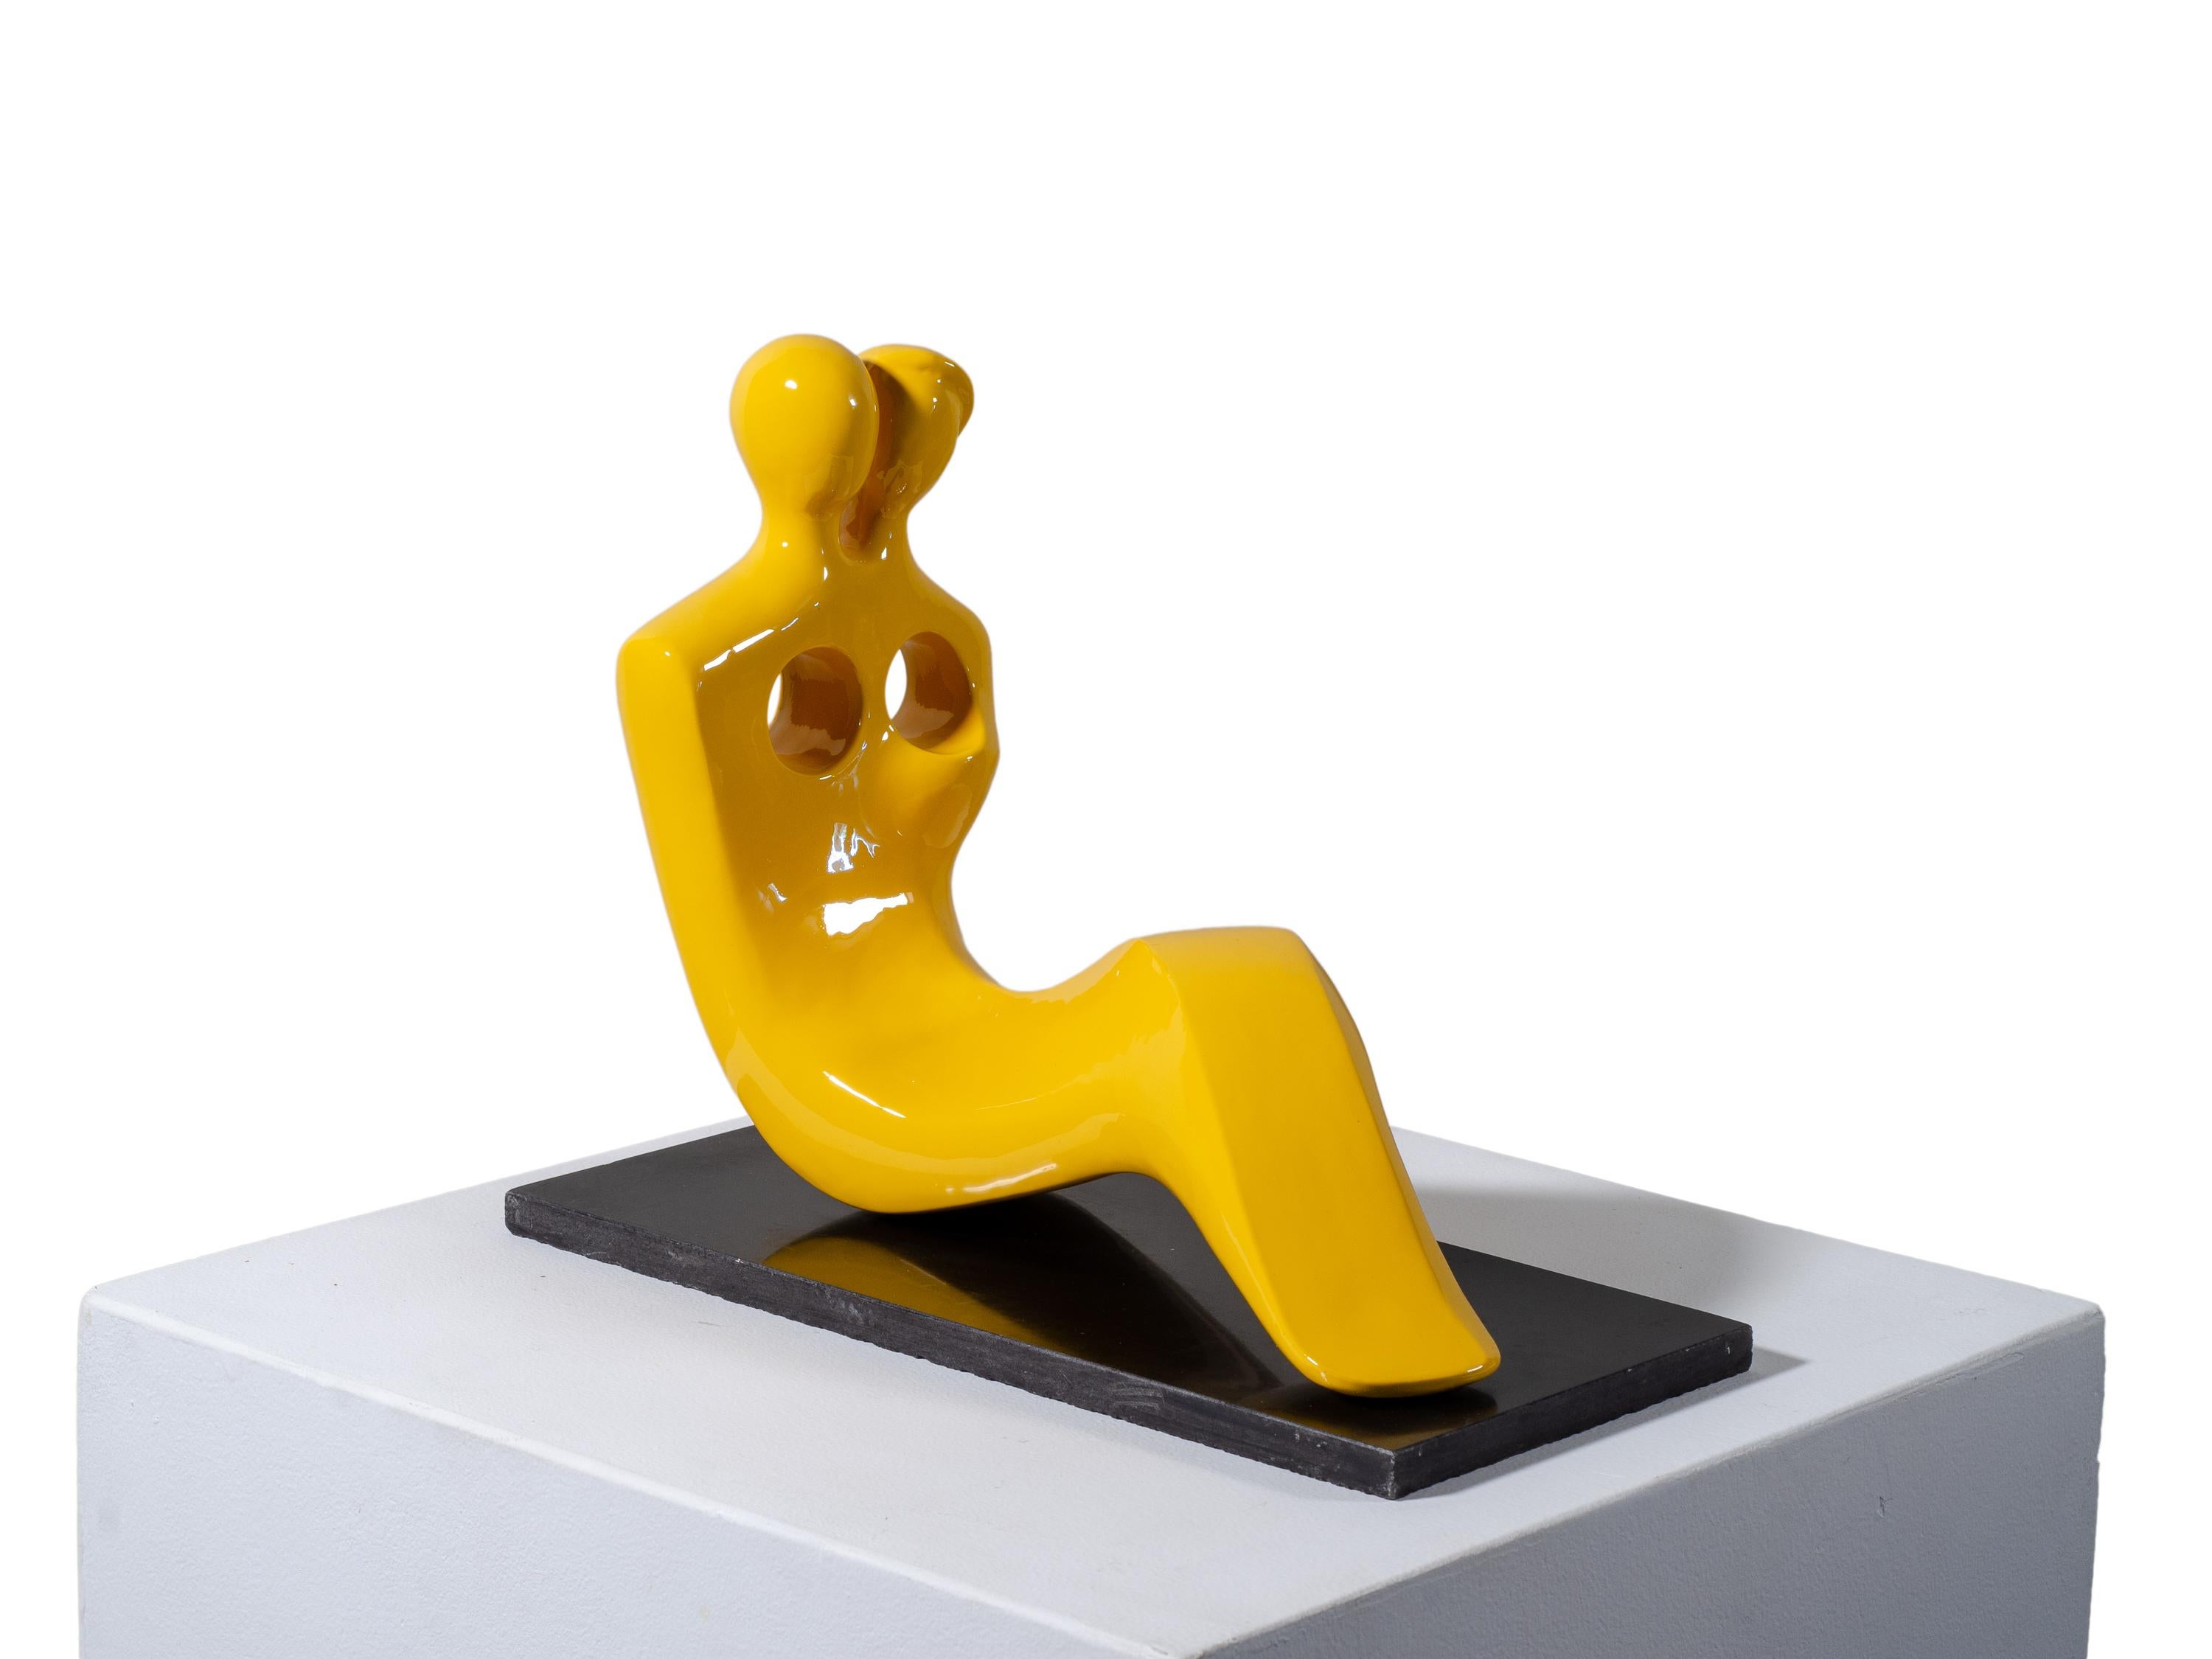 Soul Mates #3 (in yellow) When in love their souls and bodies fuse into one. - Abstract Sculpture by Beatriz Gerenstein